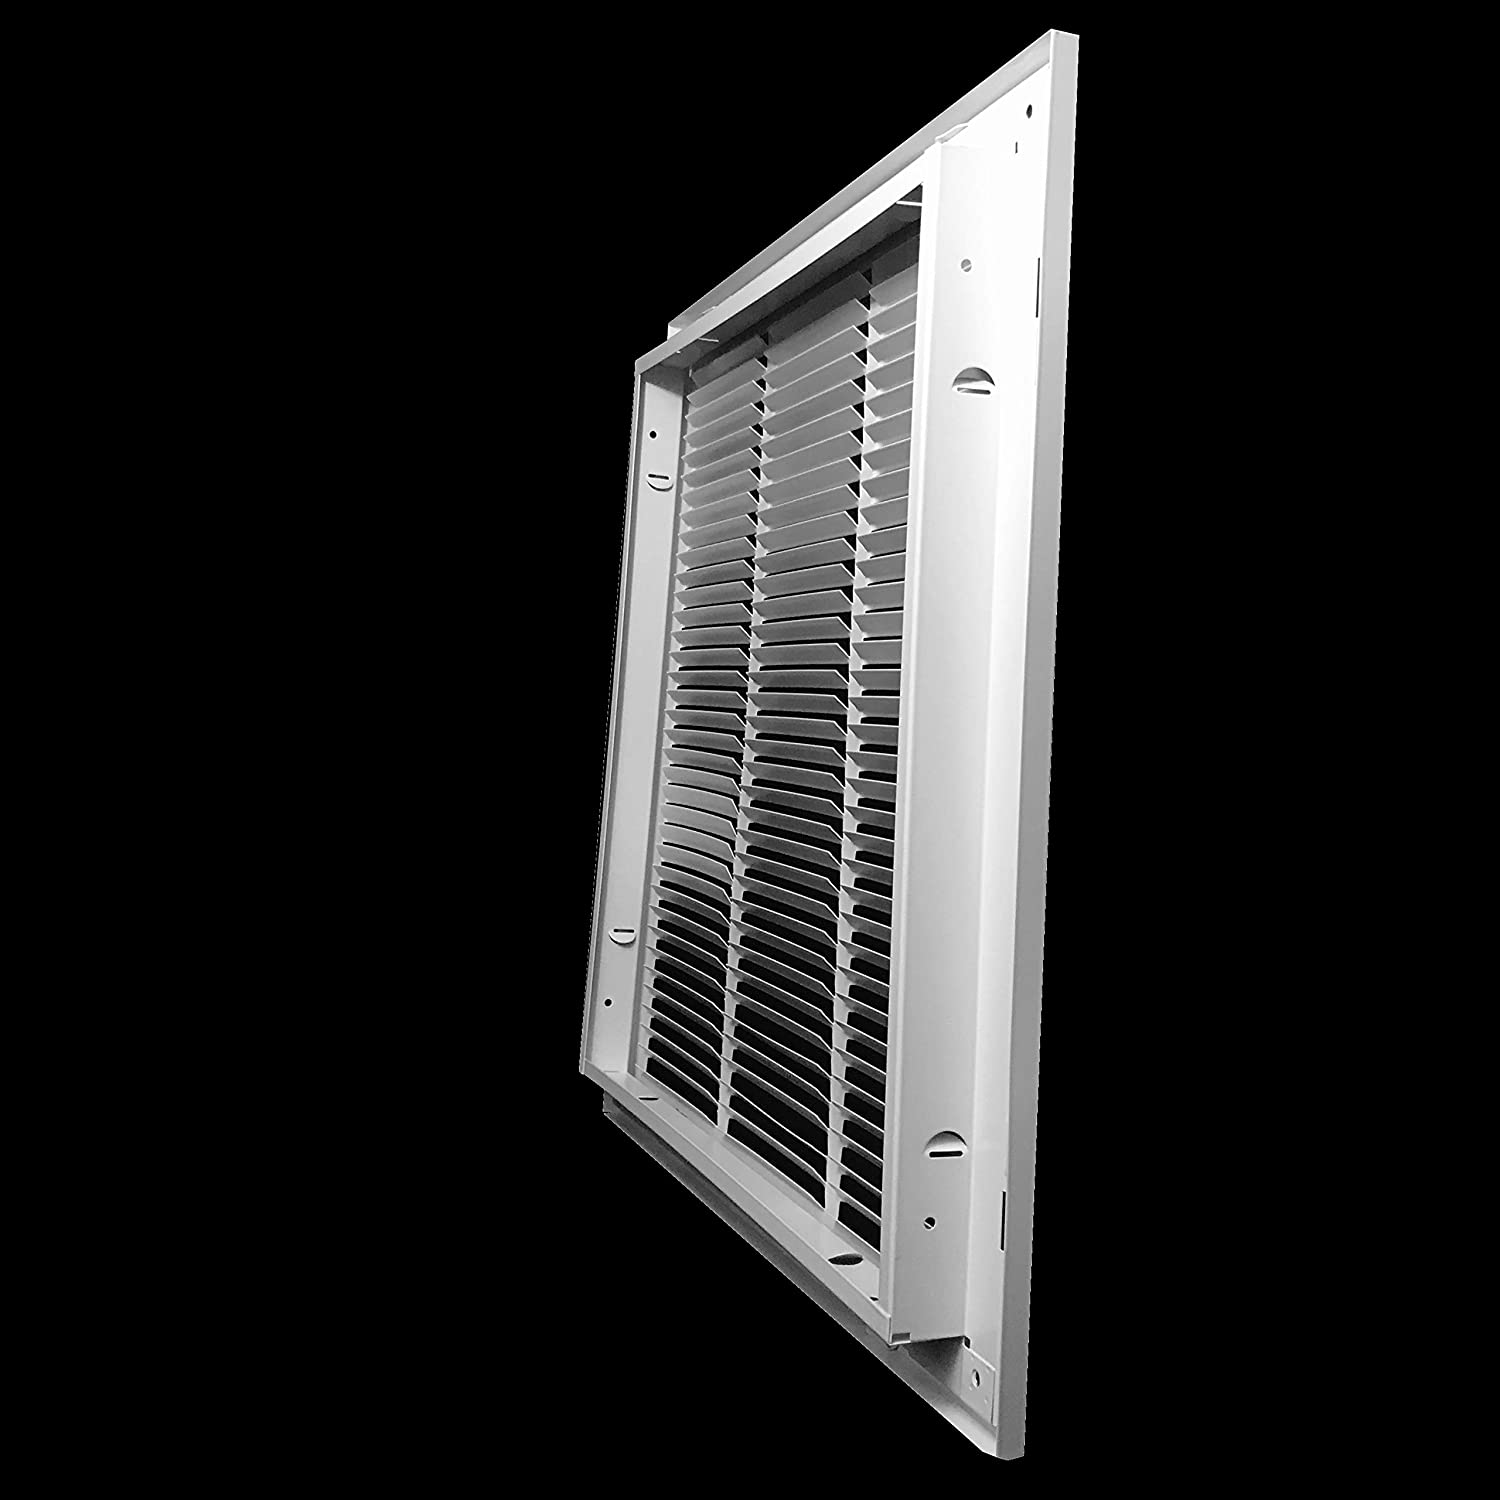 20" X 25" Duct Opening | Steel Return Air Filter Grille for Sidewall and Ceiling